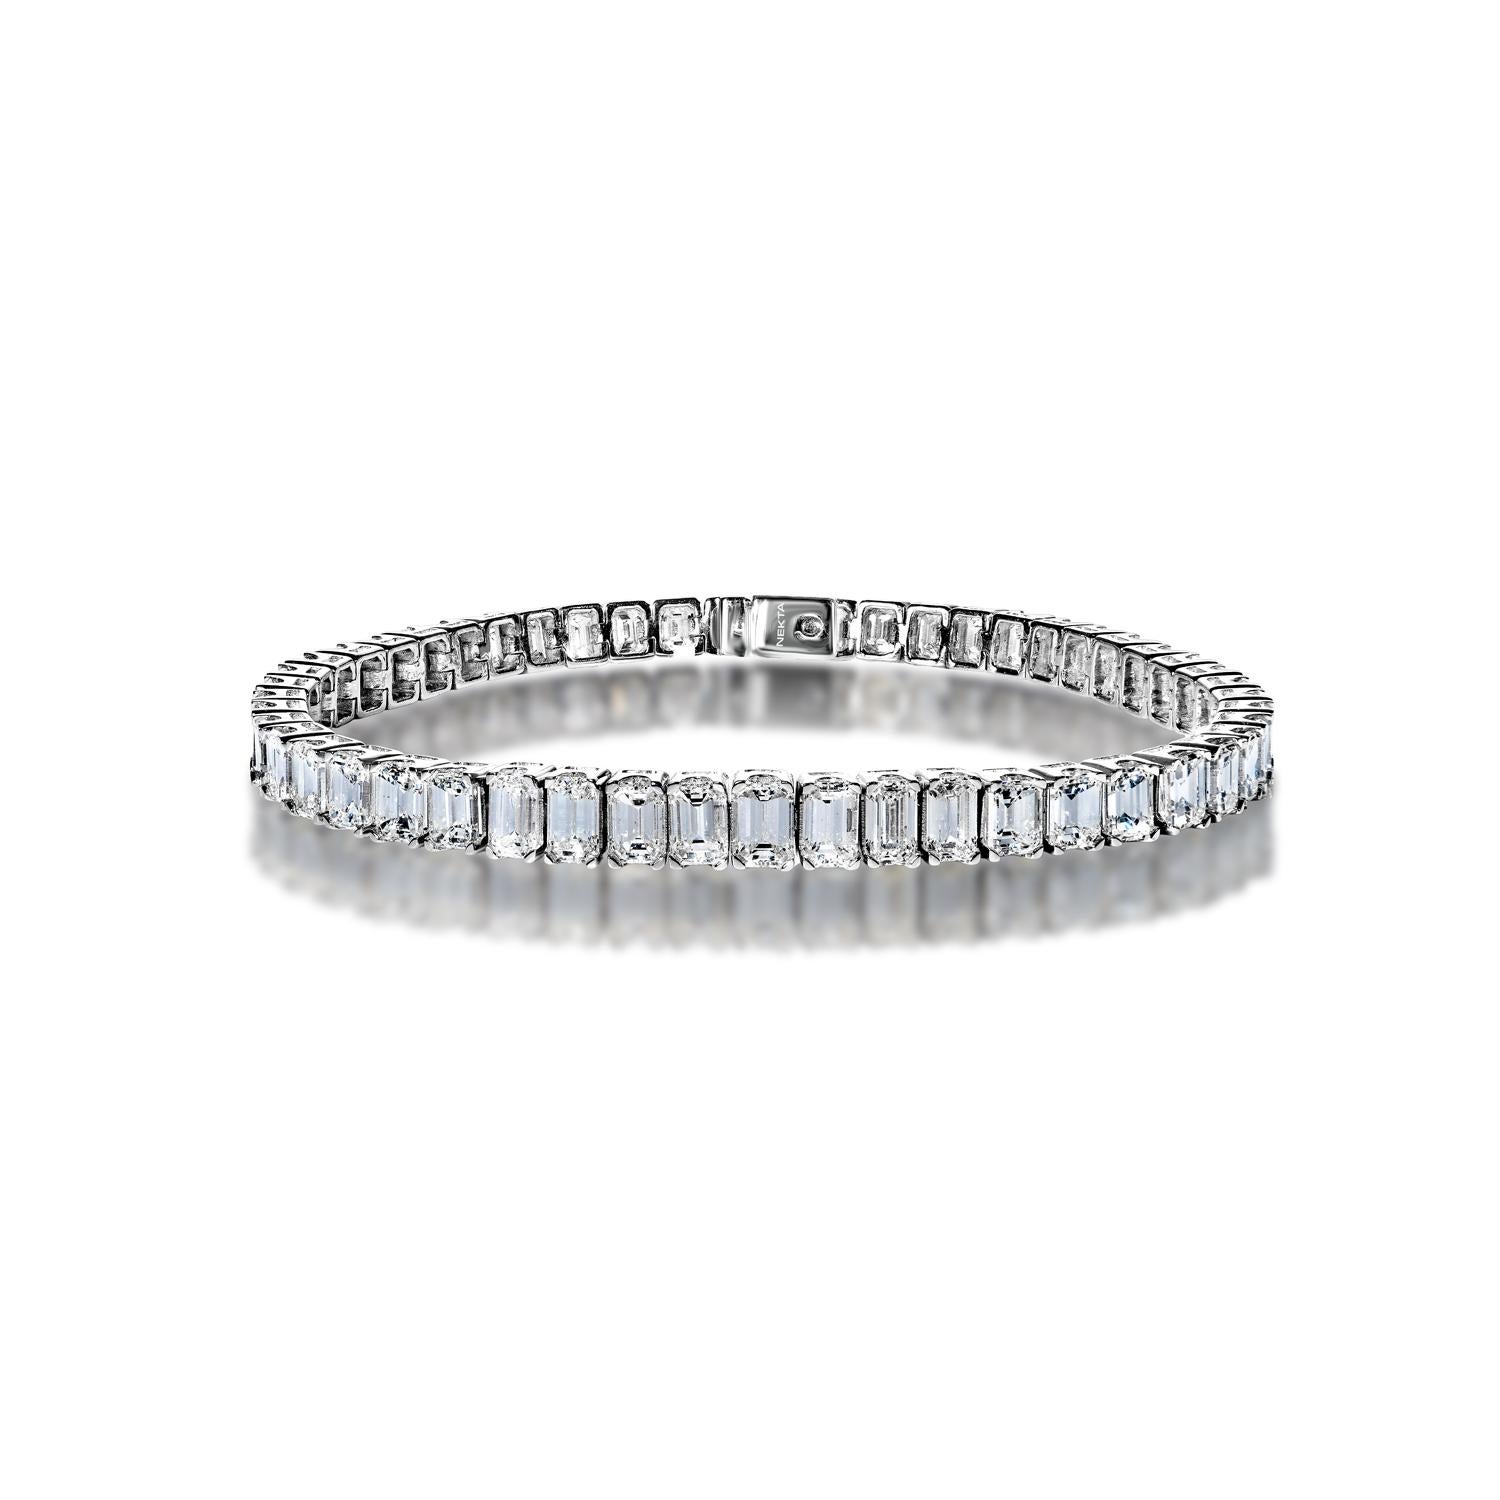 Beautify yourself with this exquisite Emerald Cut Diamond Tennis Bracelet in 18K White Gold. A line of 17.92 carats packed with  sparkling and fiery emerald cut diamonds set in the 4 prong 18K white gold setting, with a box catch and hidden safety.